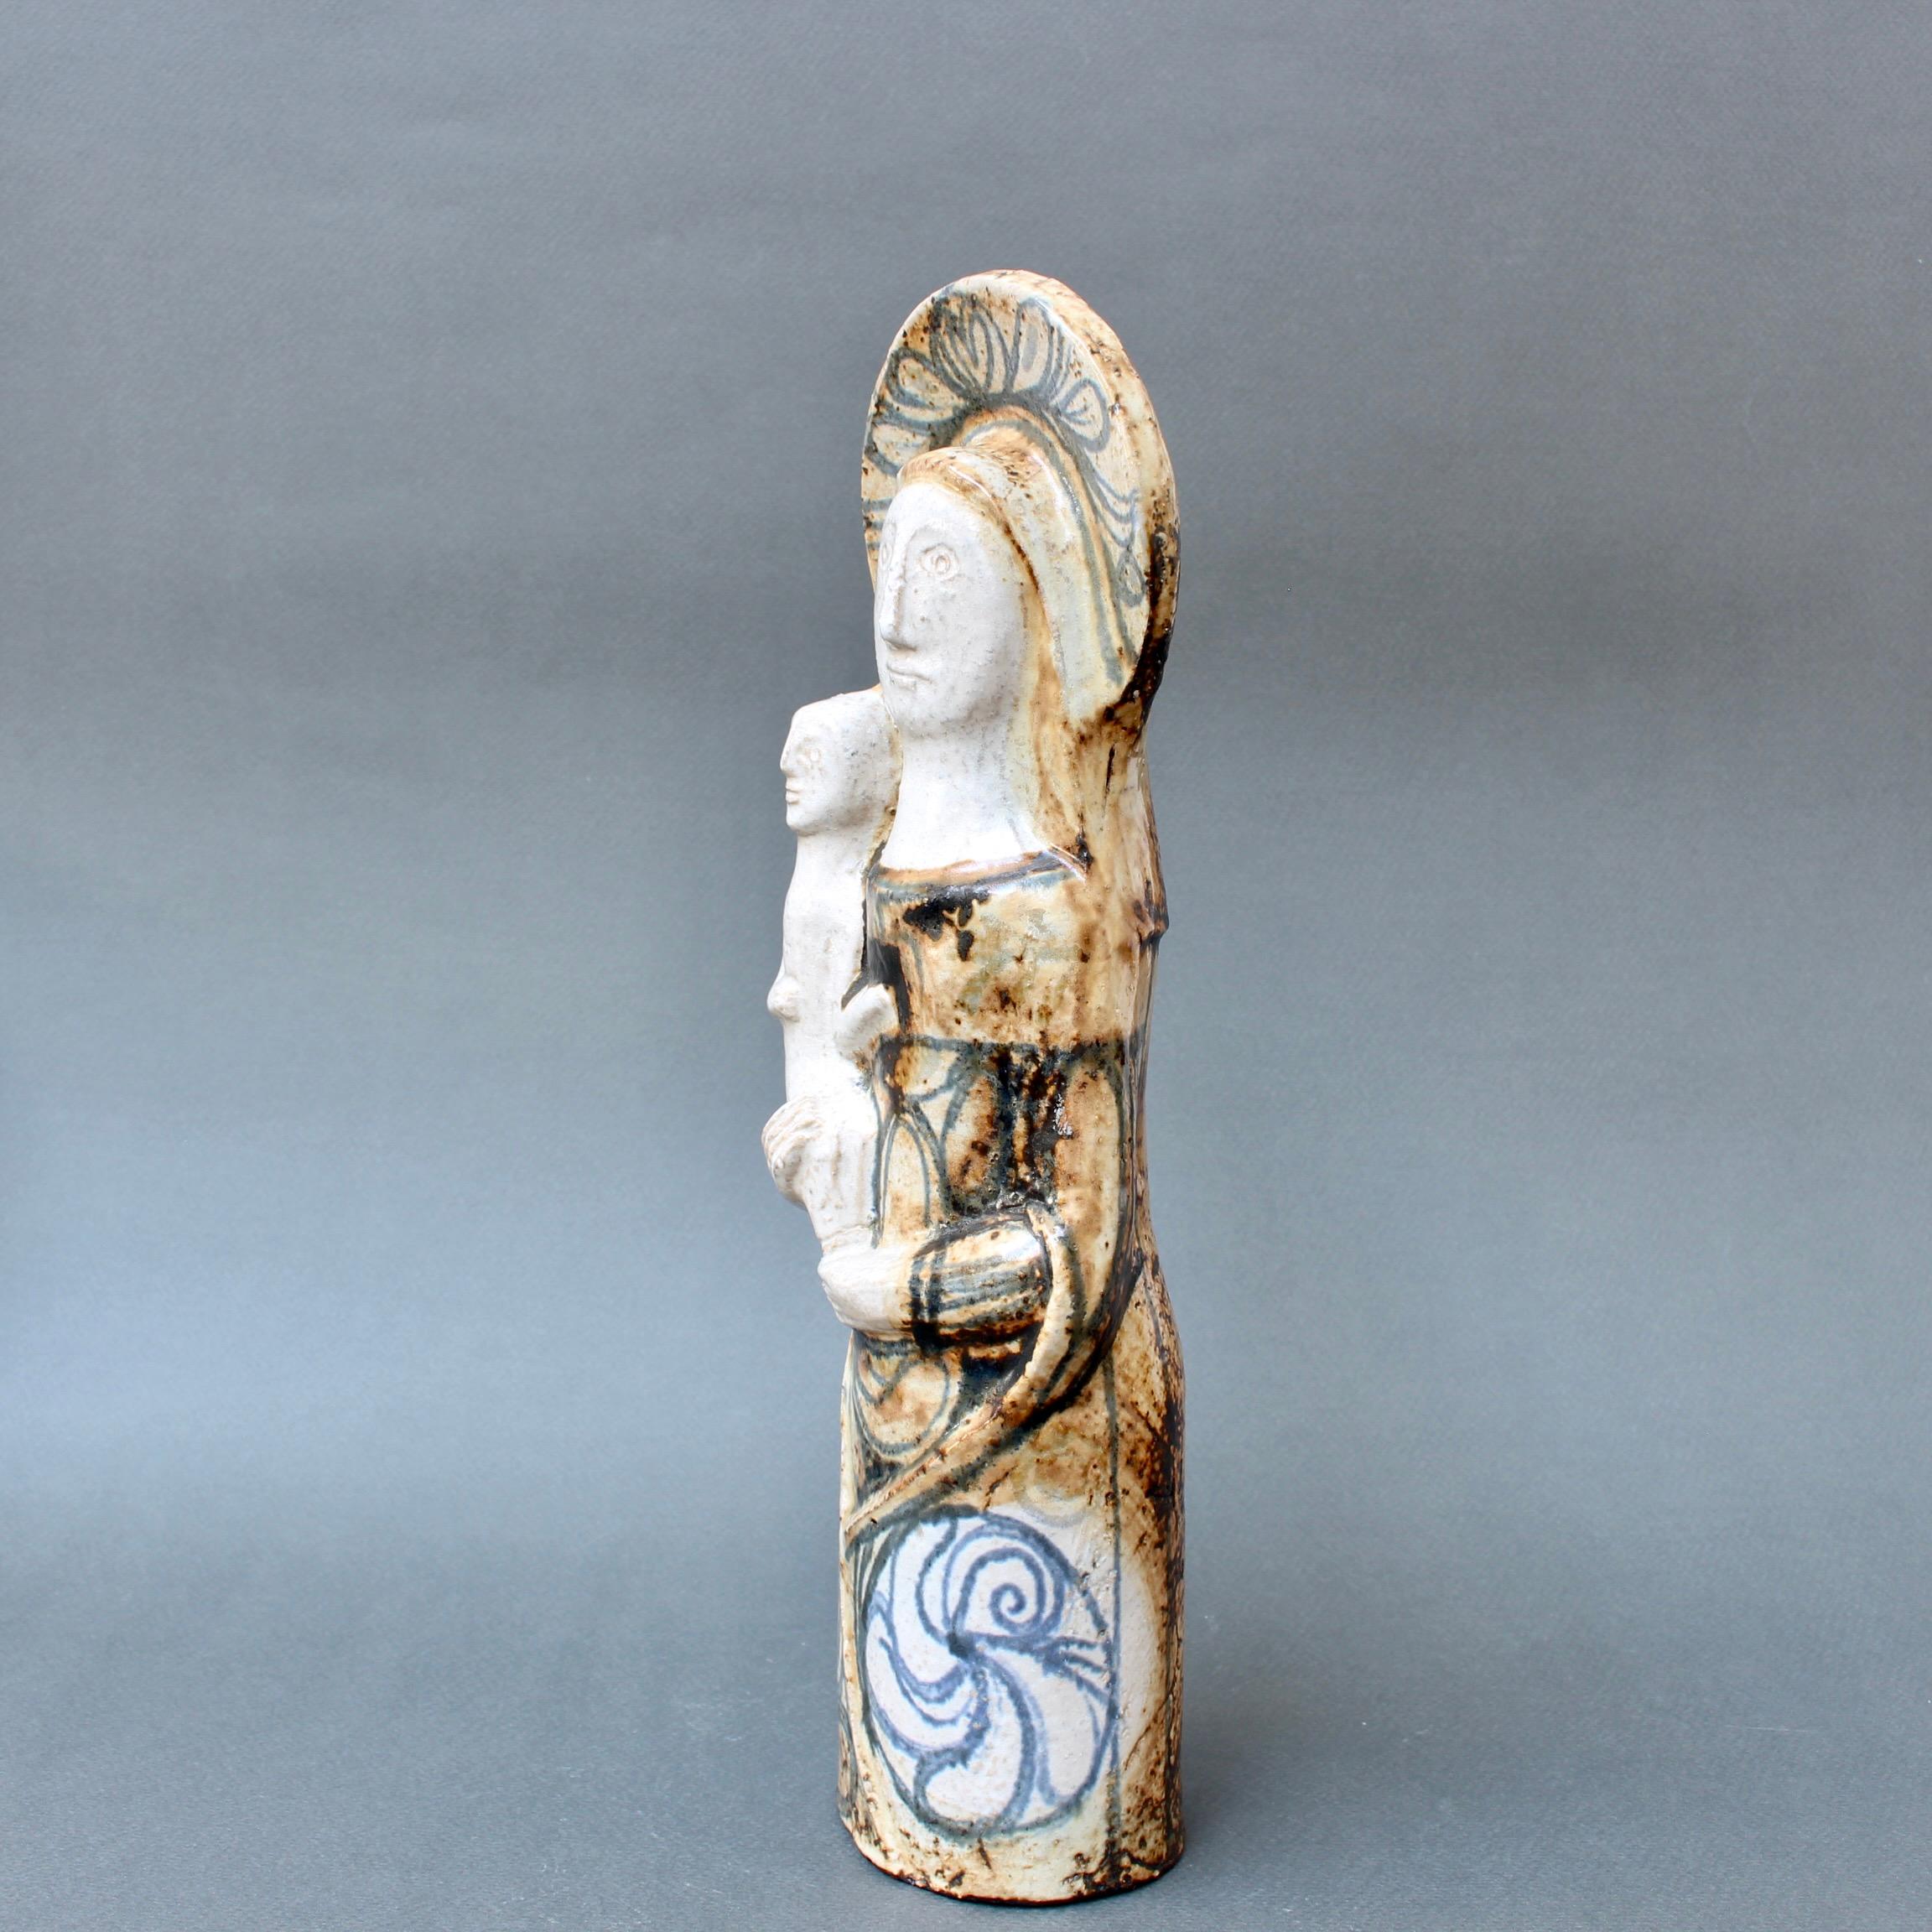 Vintage French Ceramic Sculpture of the Virgin with Child by Jean Derval '1950s' 1